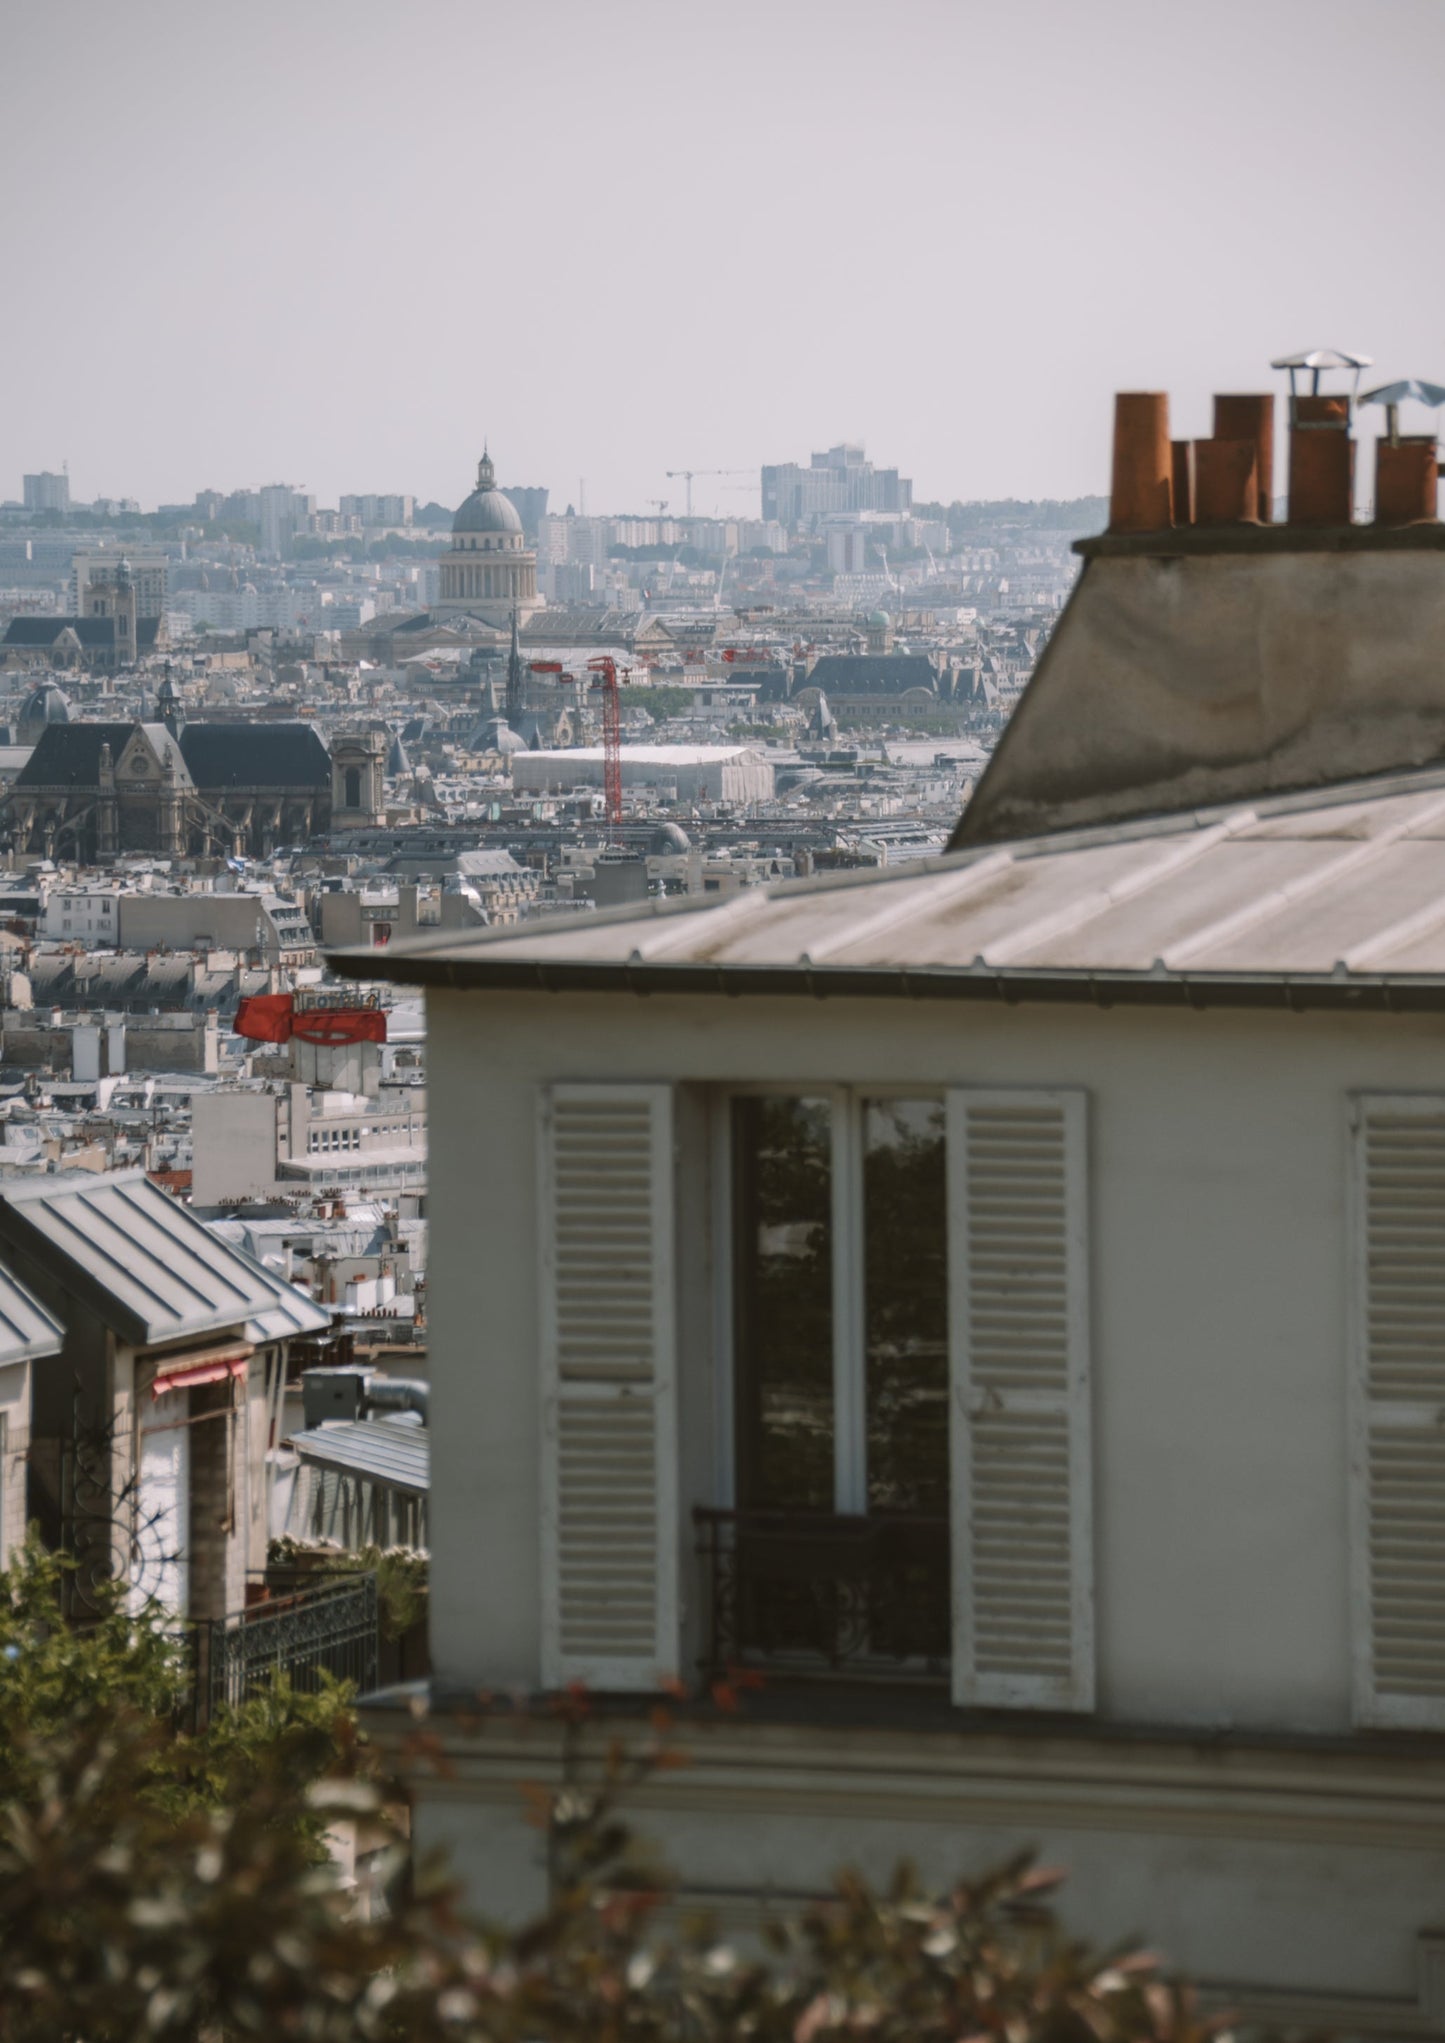 Parisian Rooftops from Montmartre